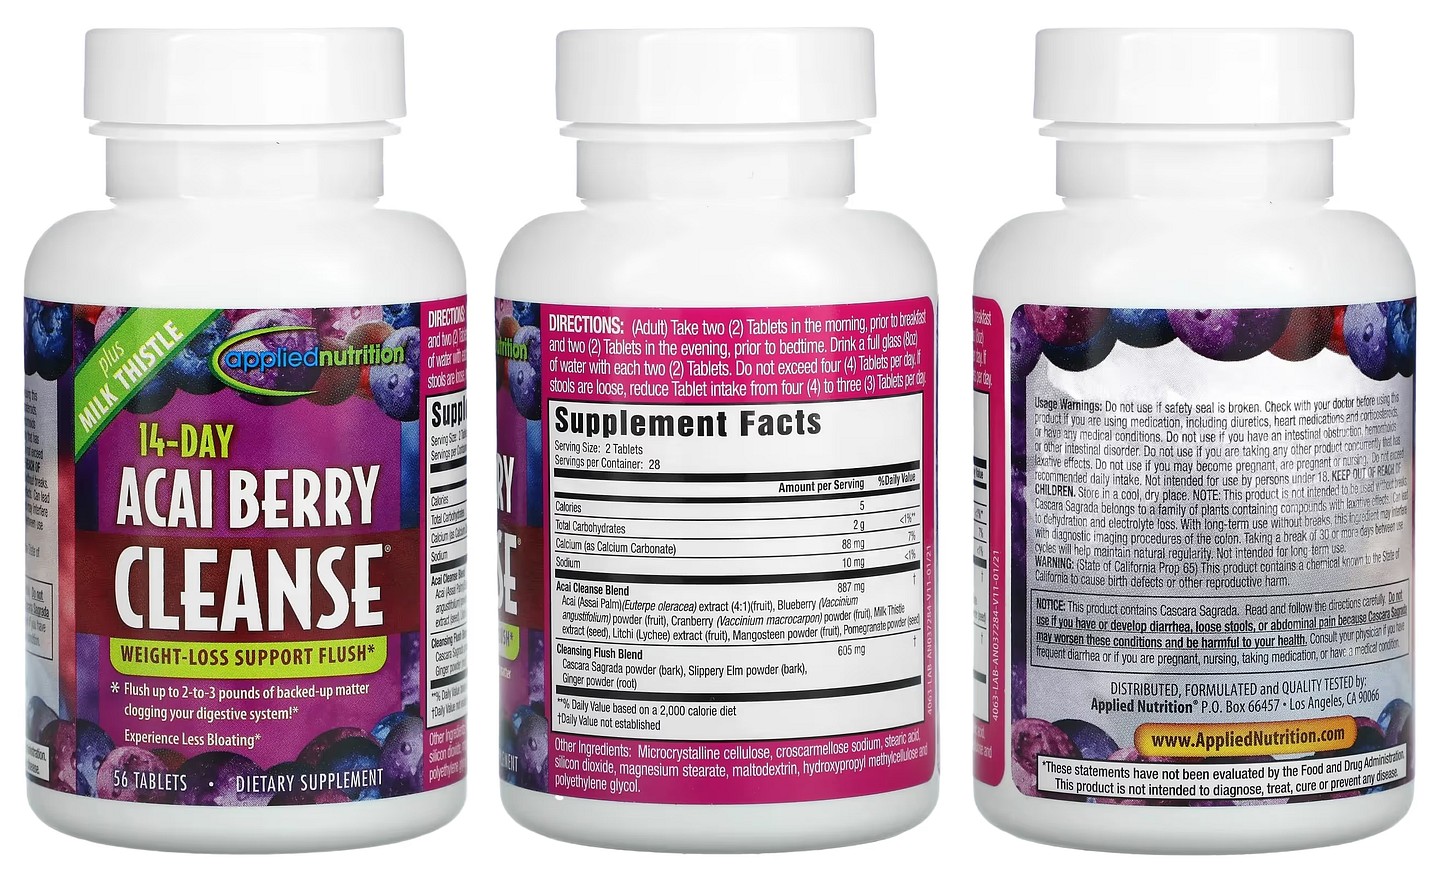 Applied Nutrition, 14-Day Acai Berry Cleanse packaging